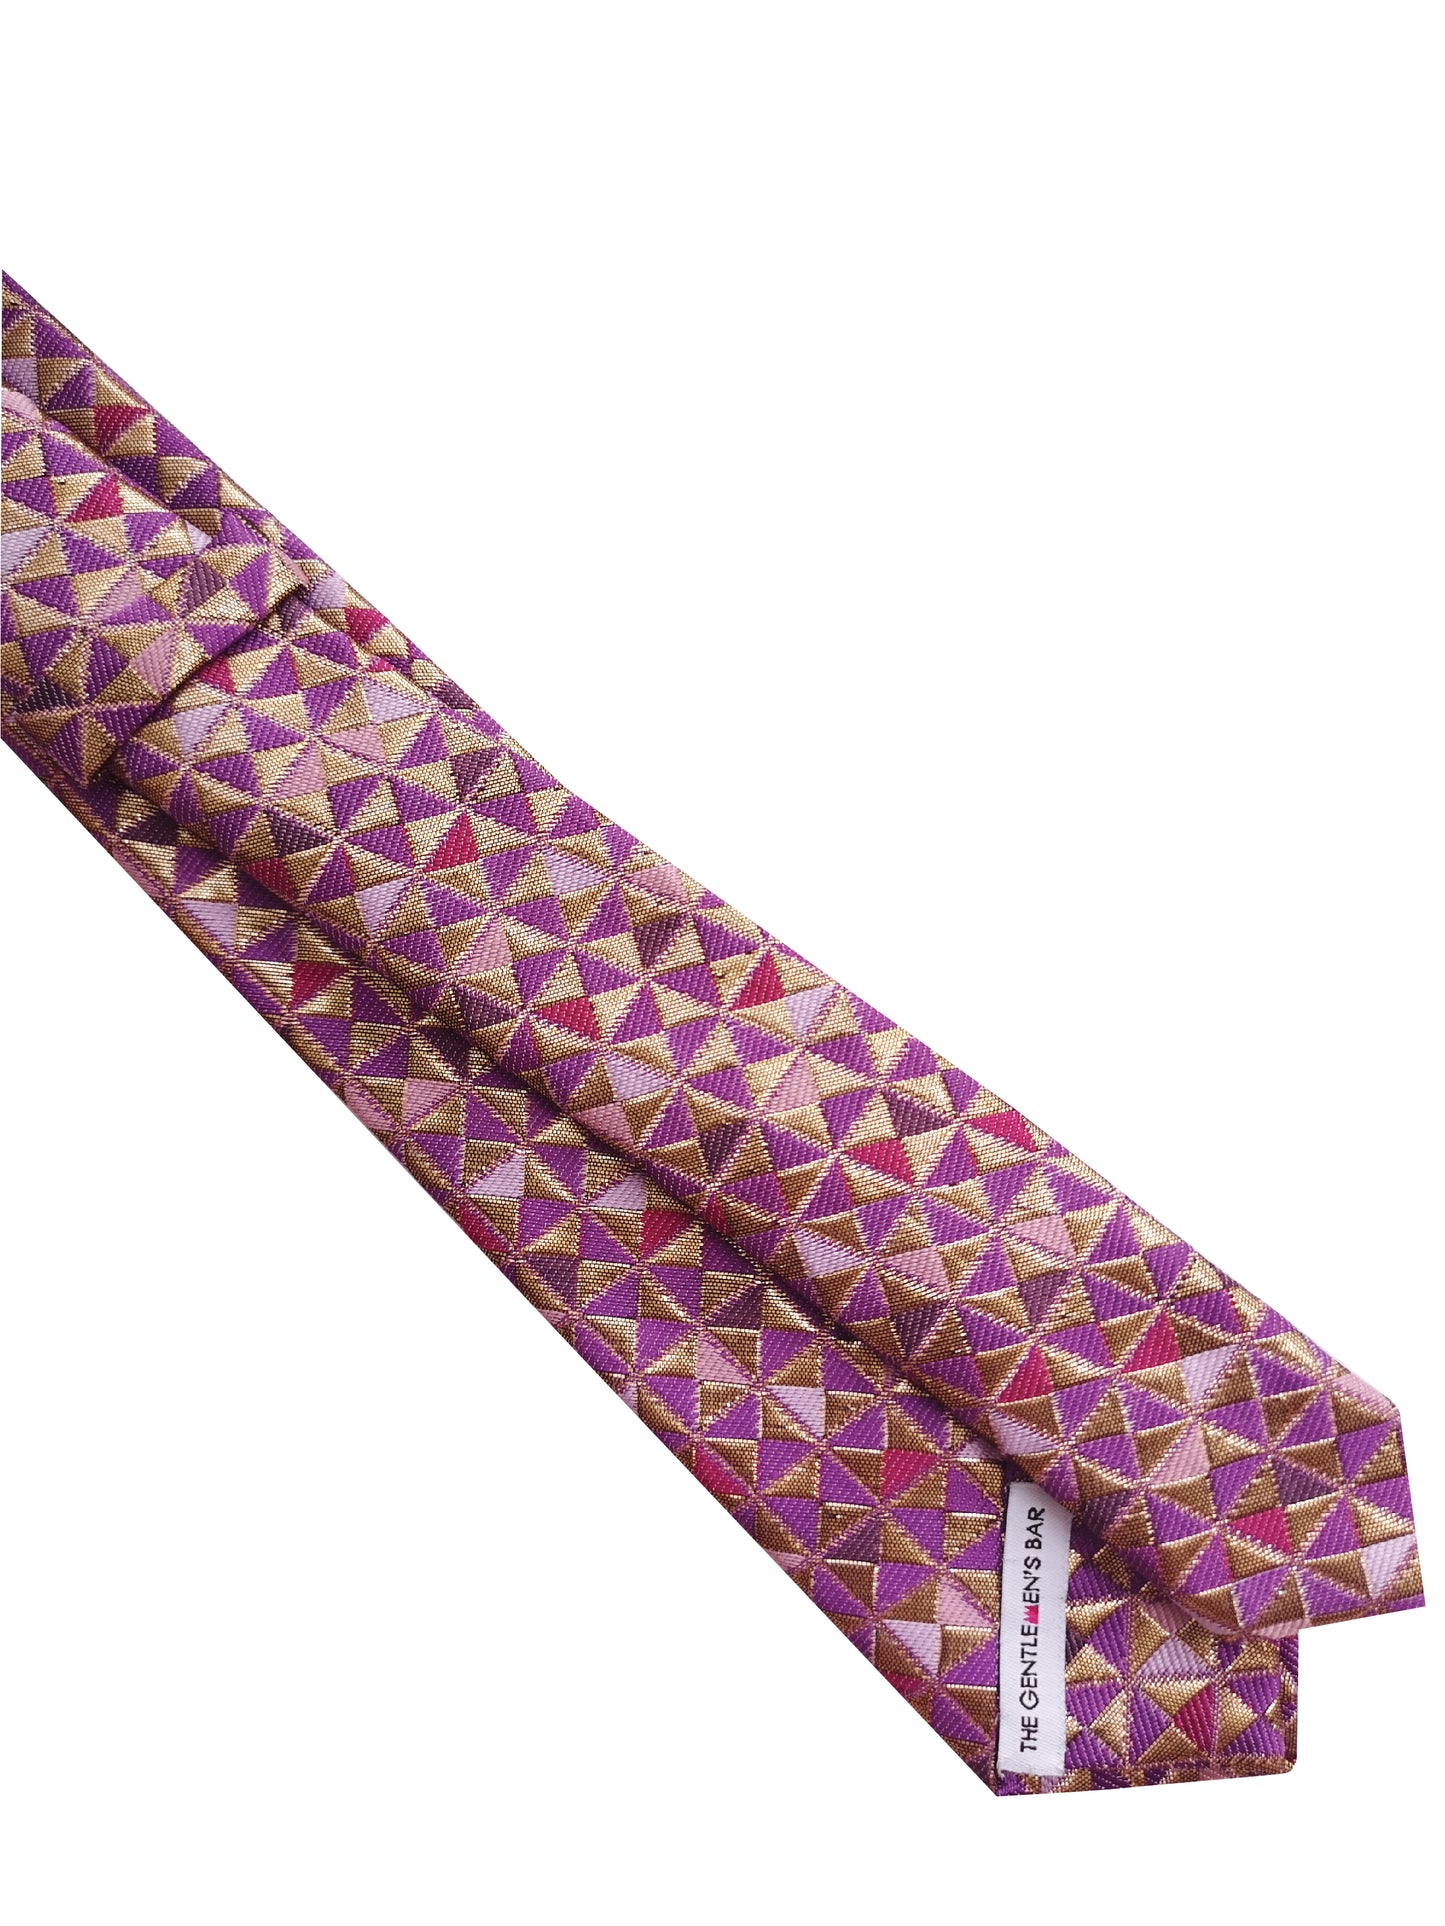 THE GIFFORD P TIE